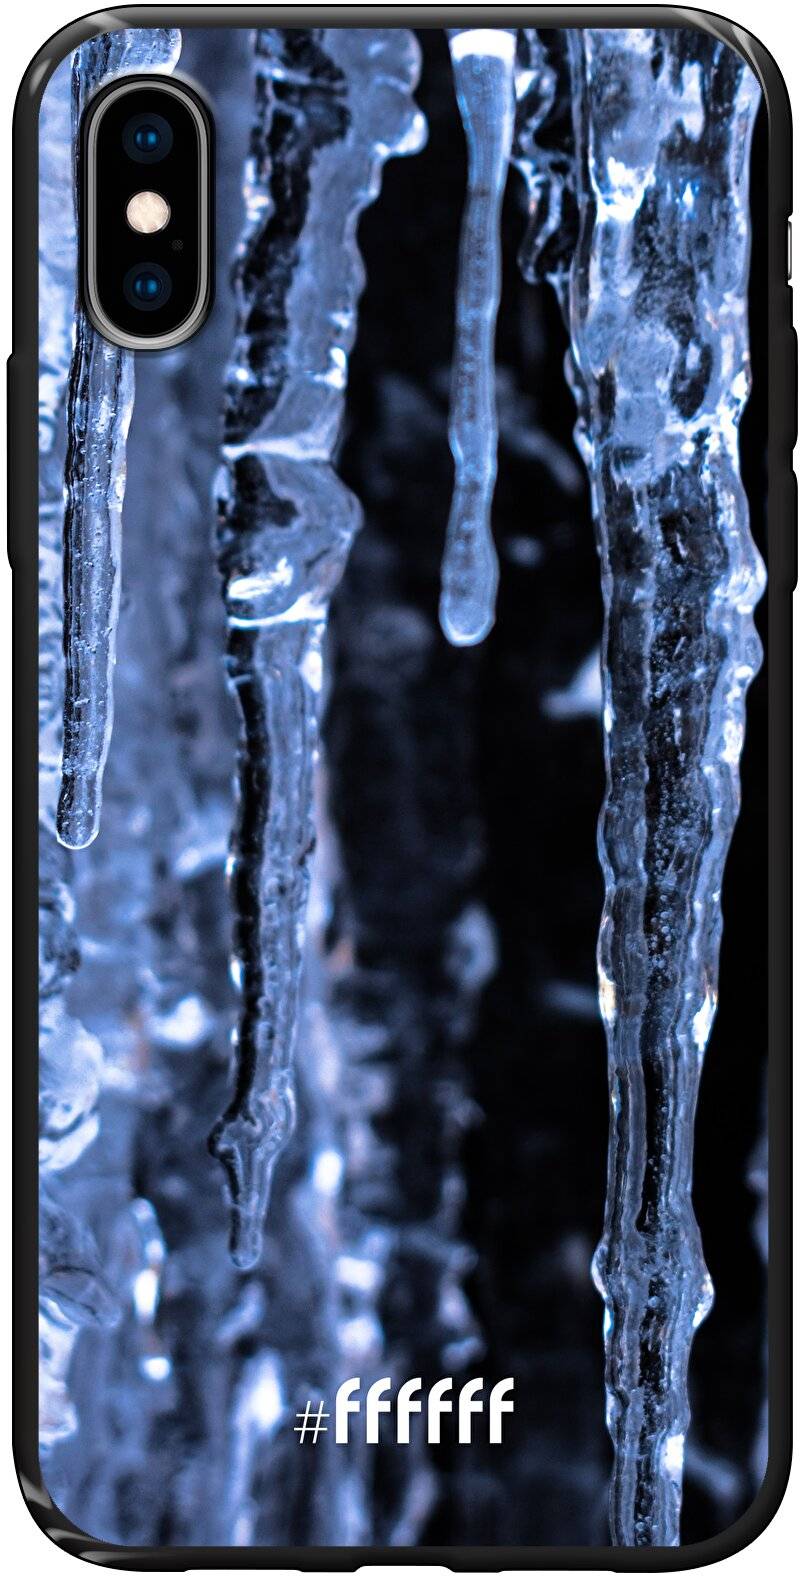 Icicles iPhone X